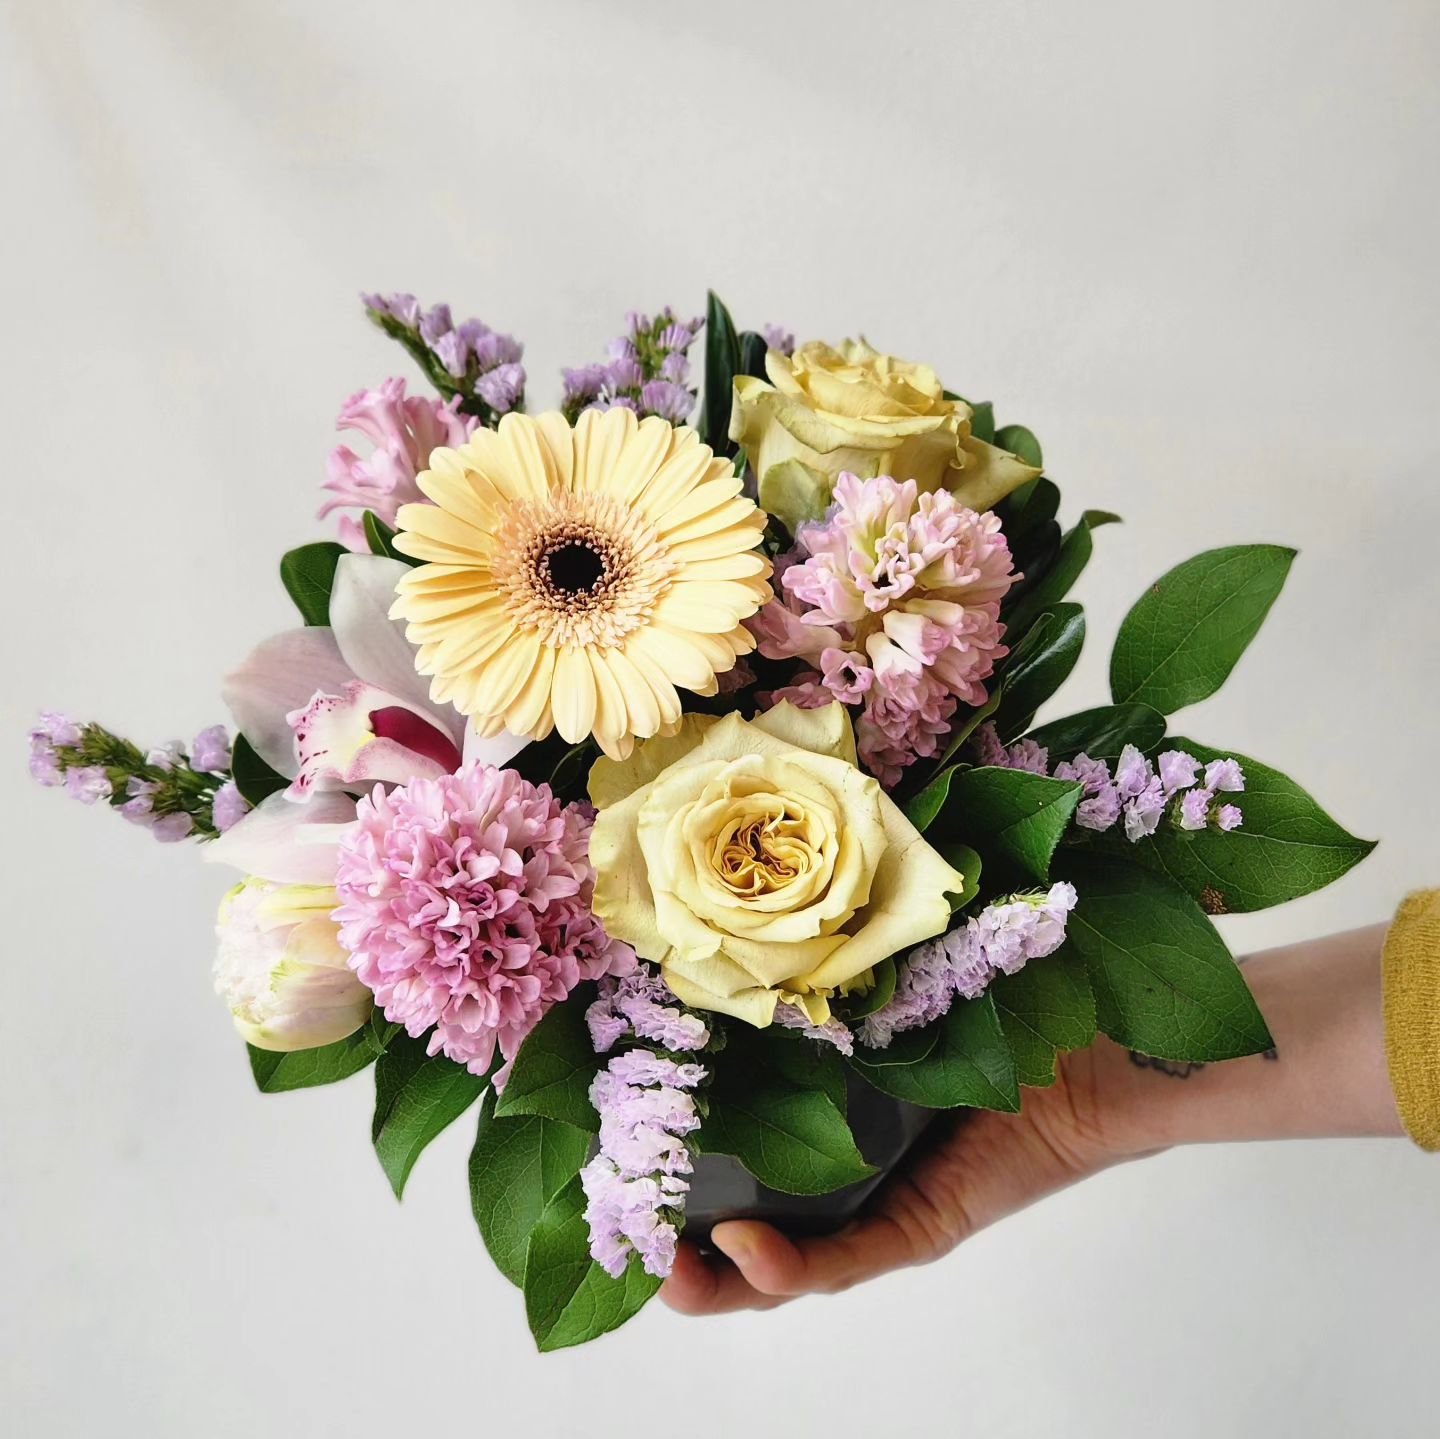 Happy Saturday, and let the long weekend begin! We're here 10-6pm today.

Sunday ▪︎ 11-3pm
Monday ▪︎ CLOSED 

#longweekendyeg #maylong #springvibes #yegflorist #swishandcompany